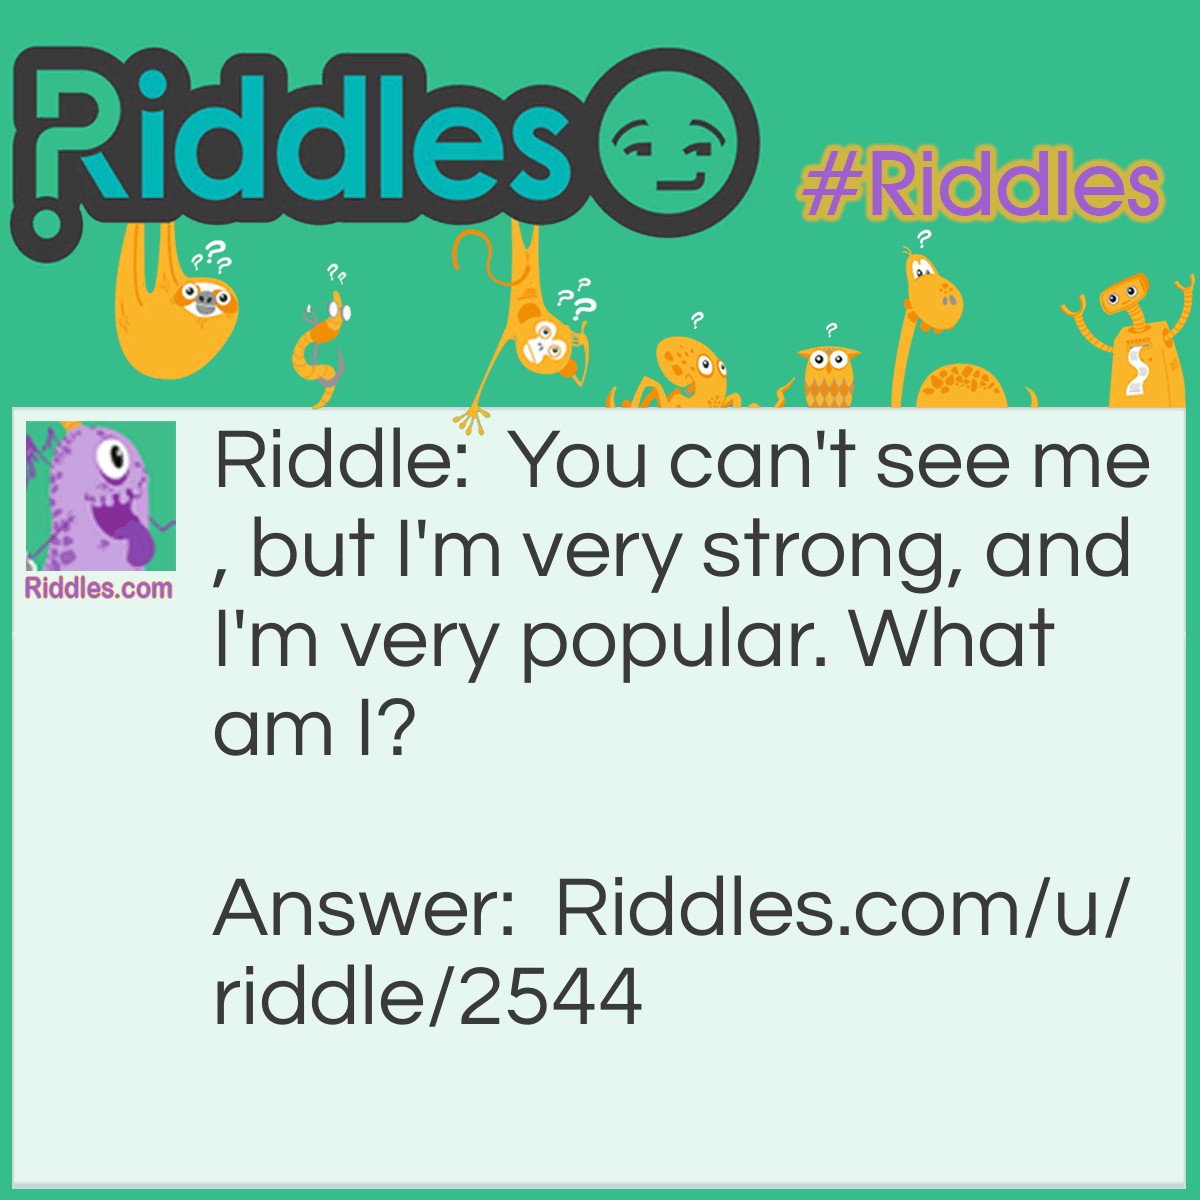 Riddle: You can't see me, but I'm very strong, and I'm very popular. What am I? Answer: John Cena.